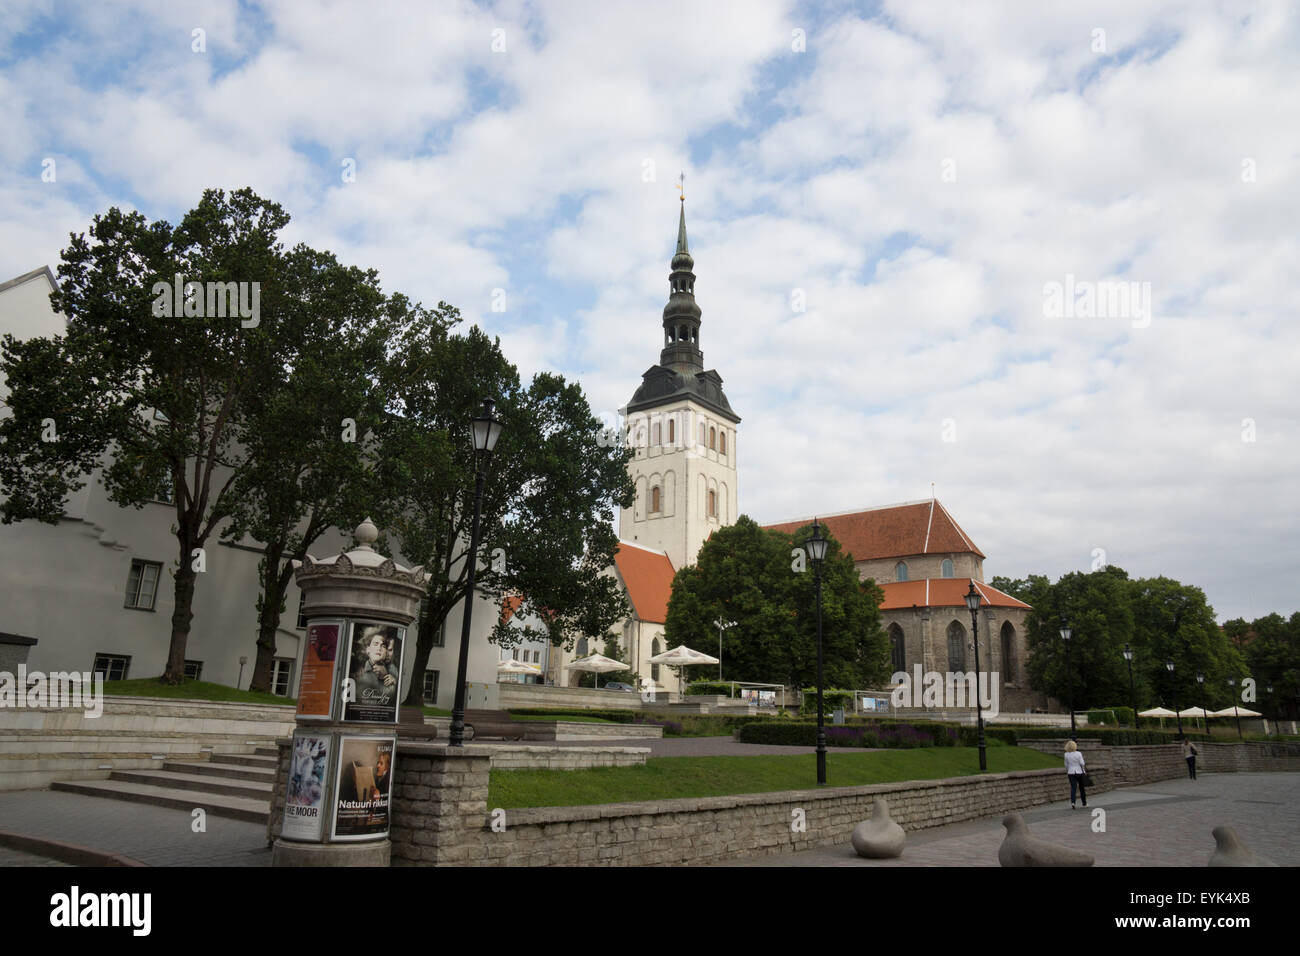 St. Nicholas Church in Tallinn, Estonia, is now a museum and a concert hall. Stock Photo